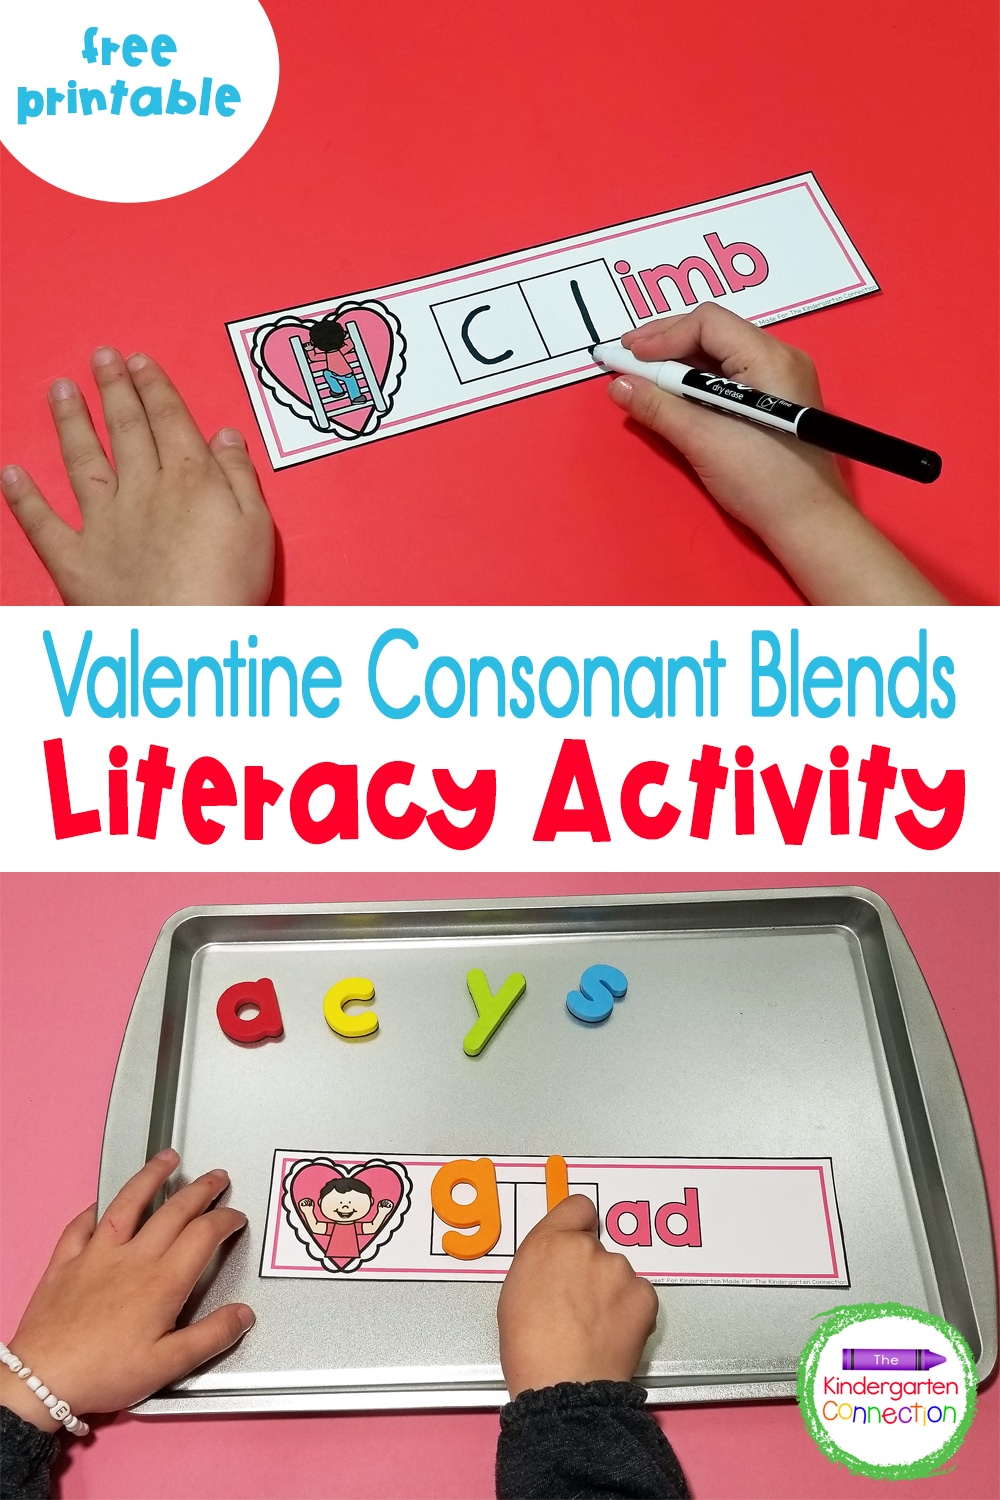 Grab this fun and free Valentine's Day Consonant Blends Activity to help your students identify consonant blends with the letter "l."